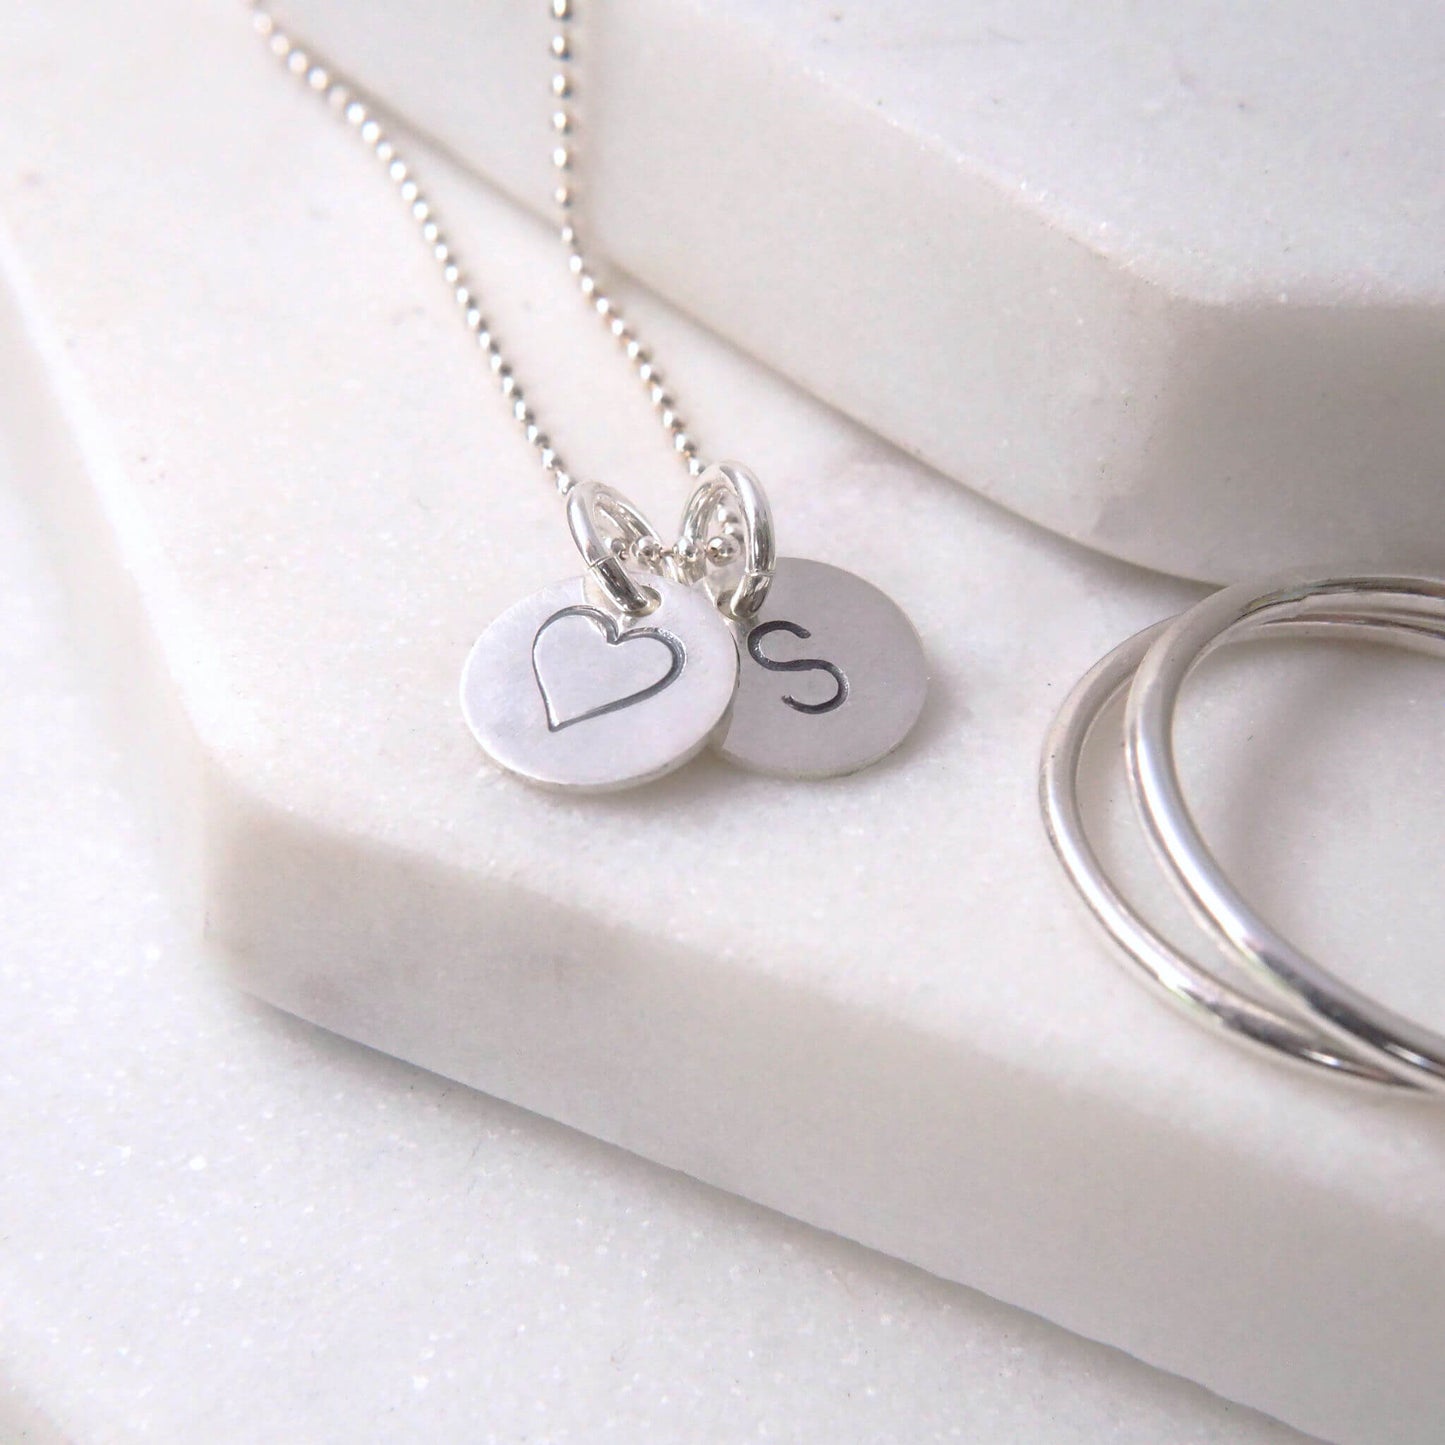 Silver letter and heart token charms on a simple silver chain. Two small silver discs, one with a heart and the other with an initial S though you can choose a different one too. Subtle and understated necklace handmade by maram jewellery in UK